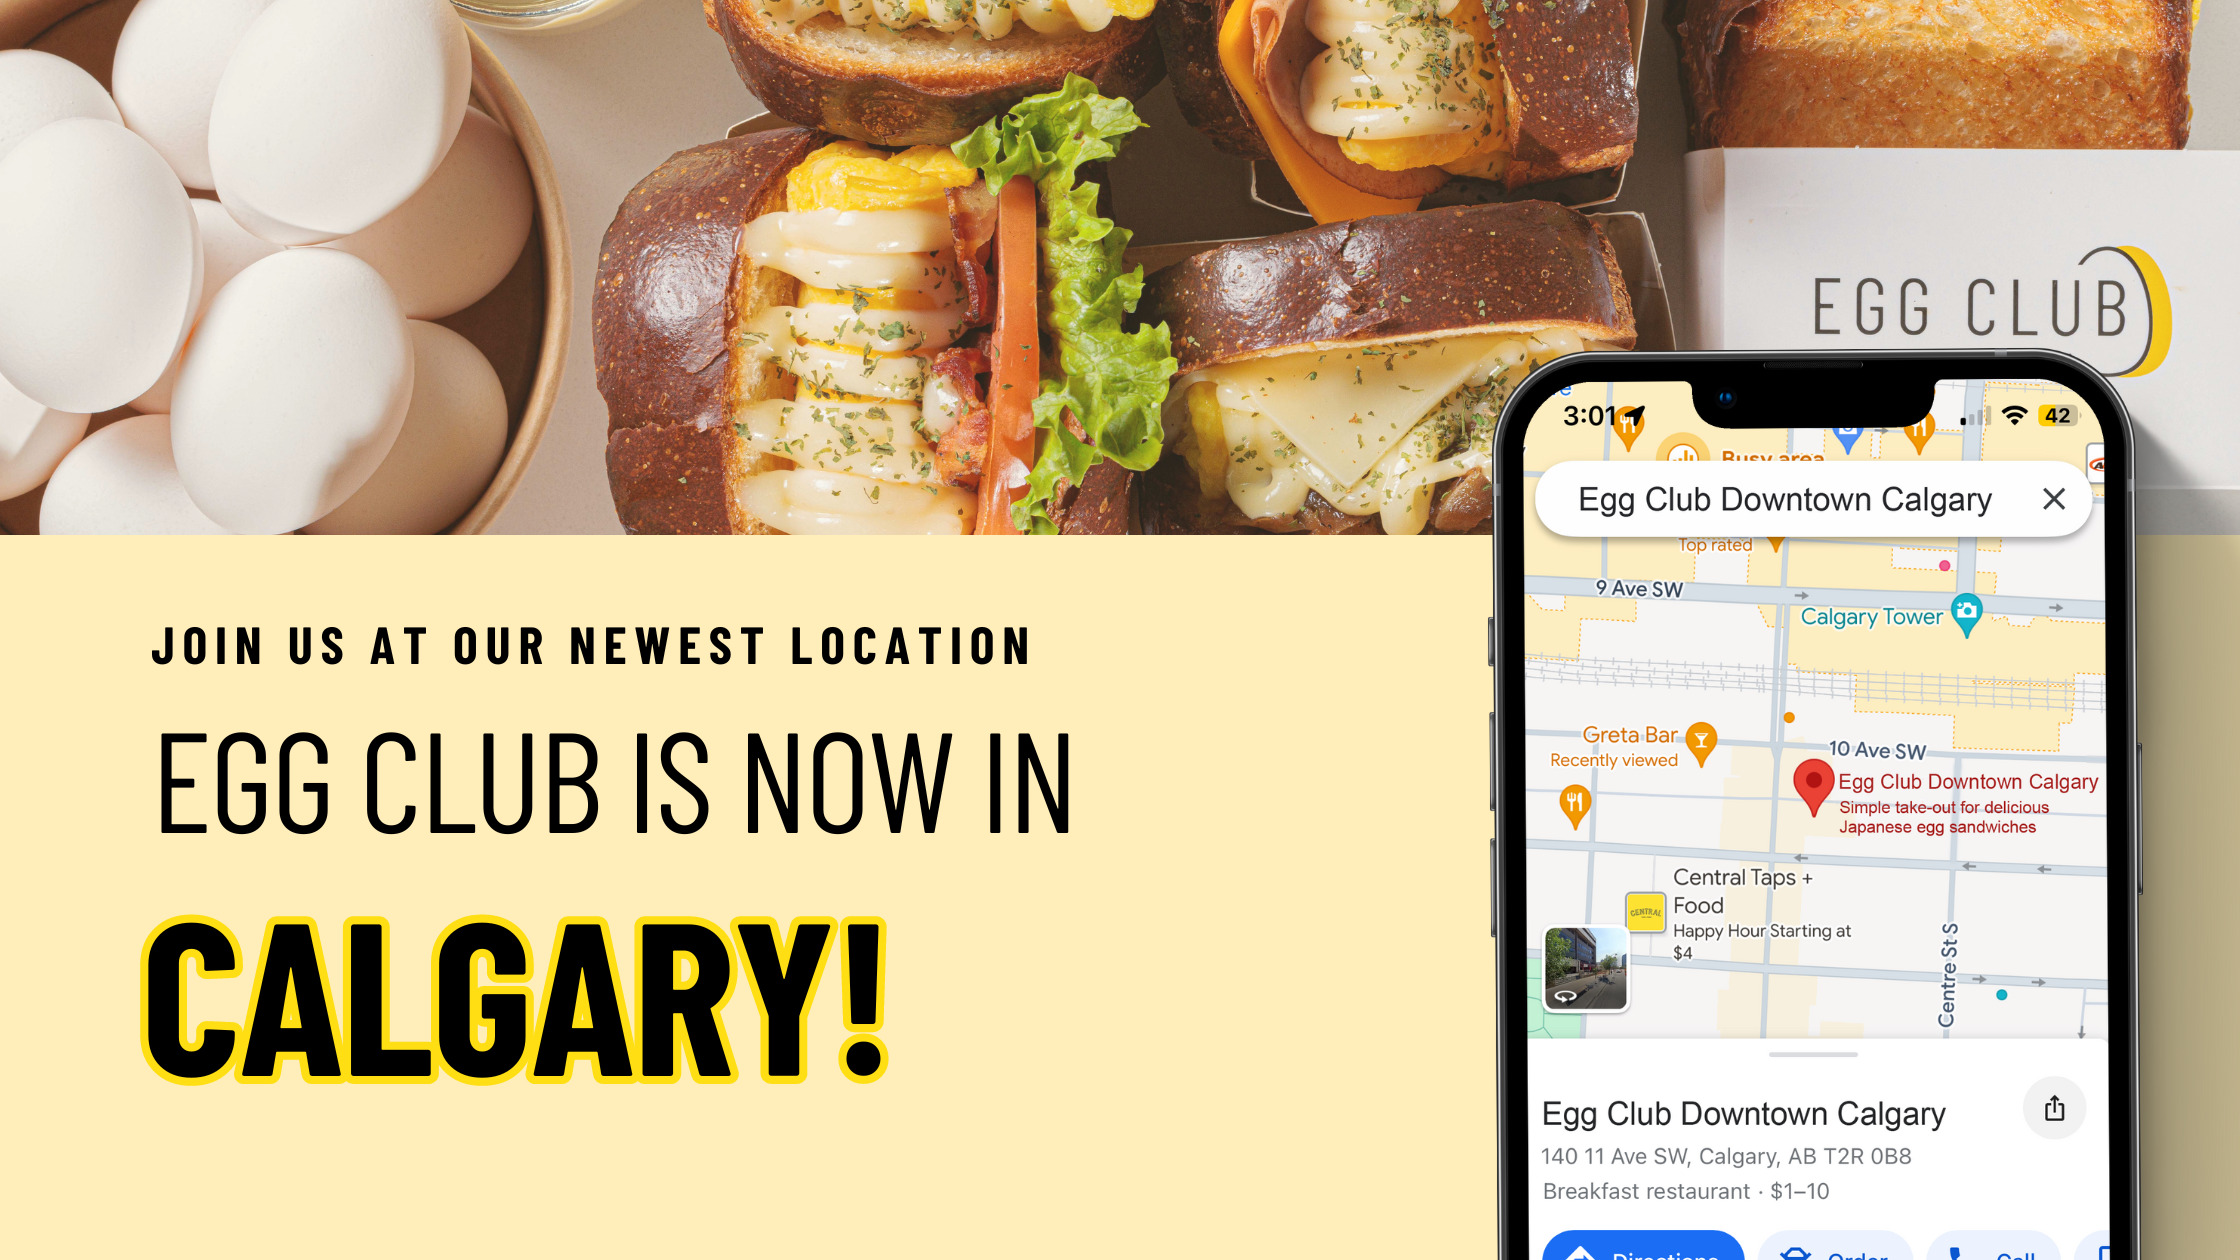 Join Us At Our Newest Location: Egg Club is now in Calgary!